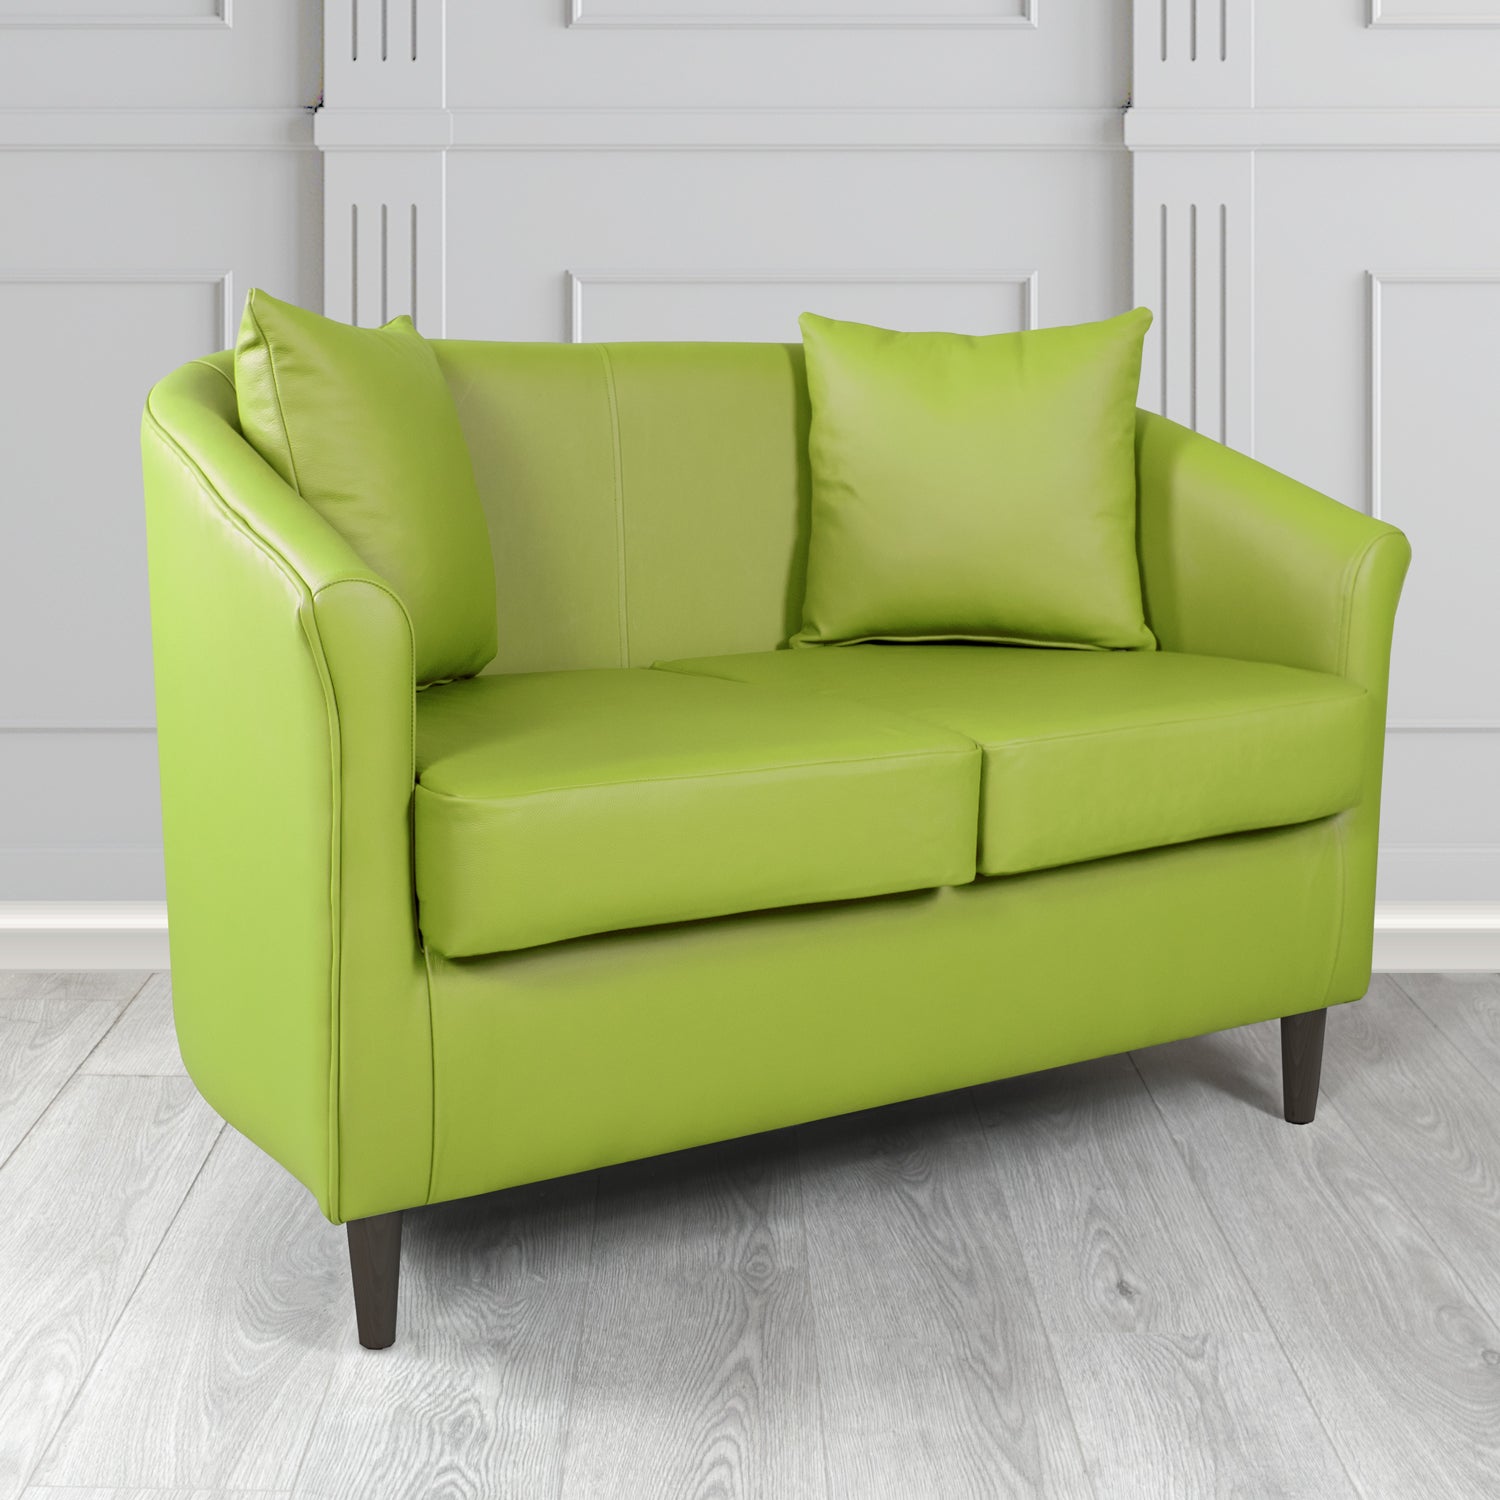 St Tropez Shelly Field Green Crib 5 Genuine Leather 2 Seater Tub Sofa with Scatter Cushions - The Tub Chair Shop